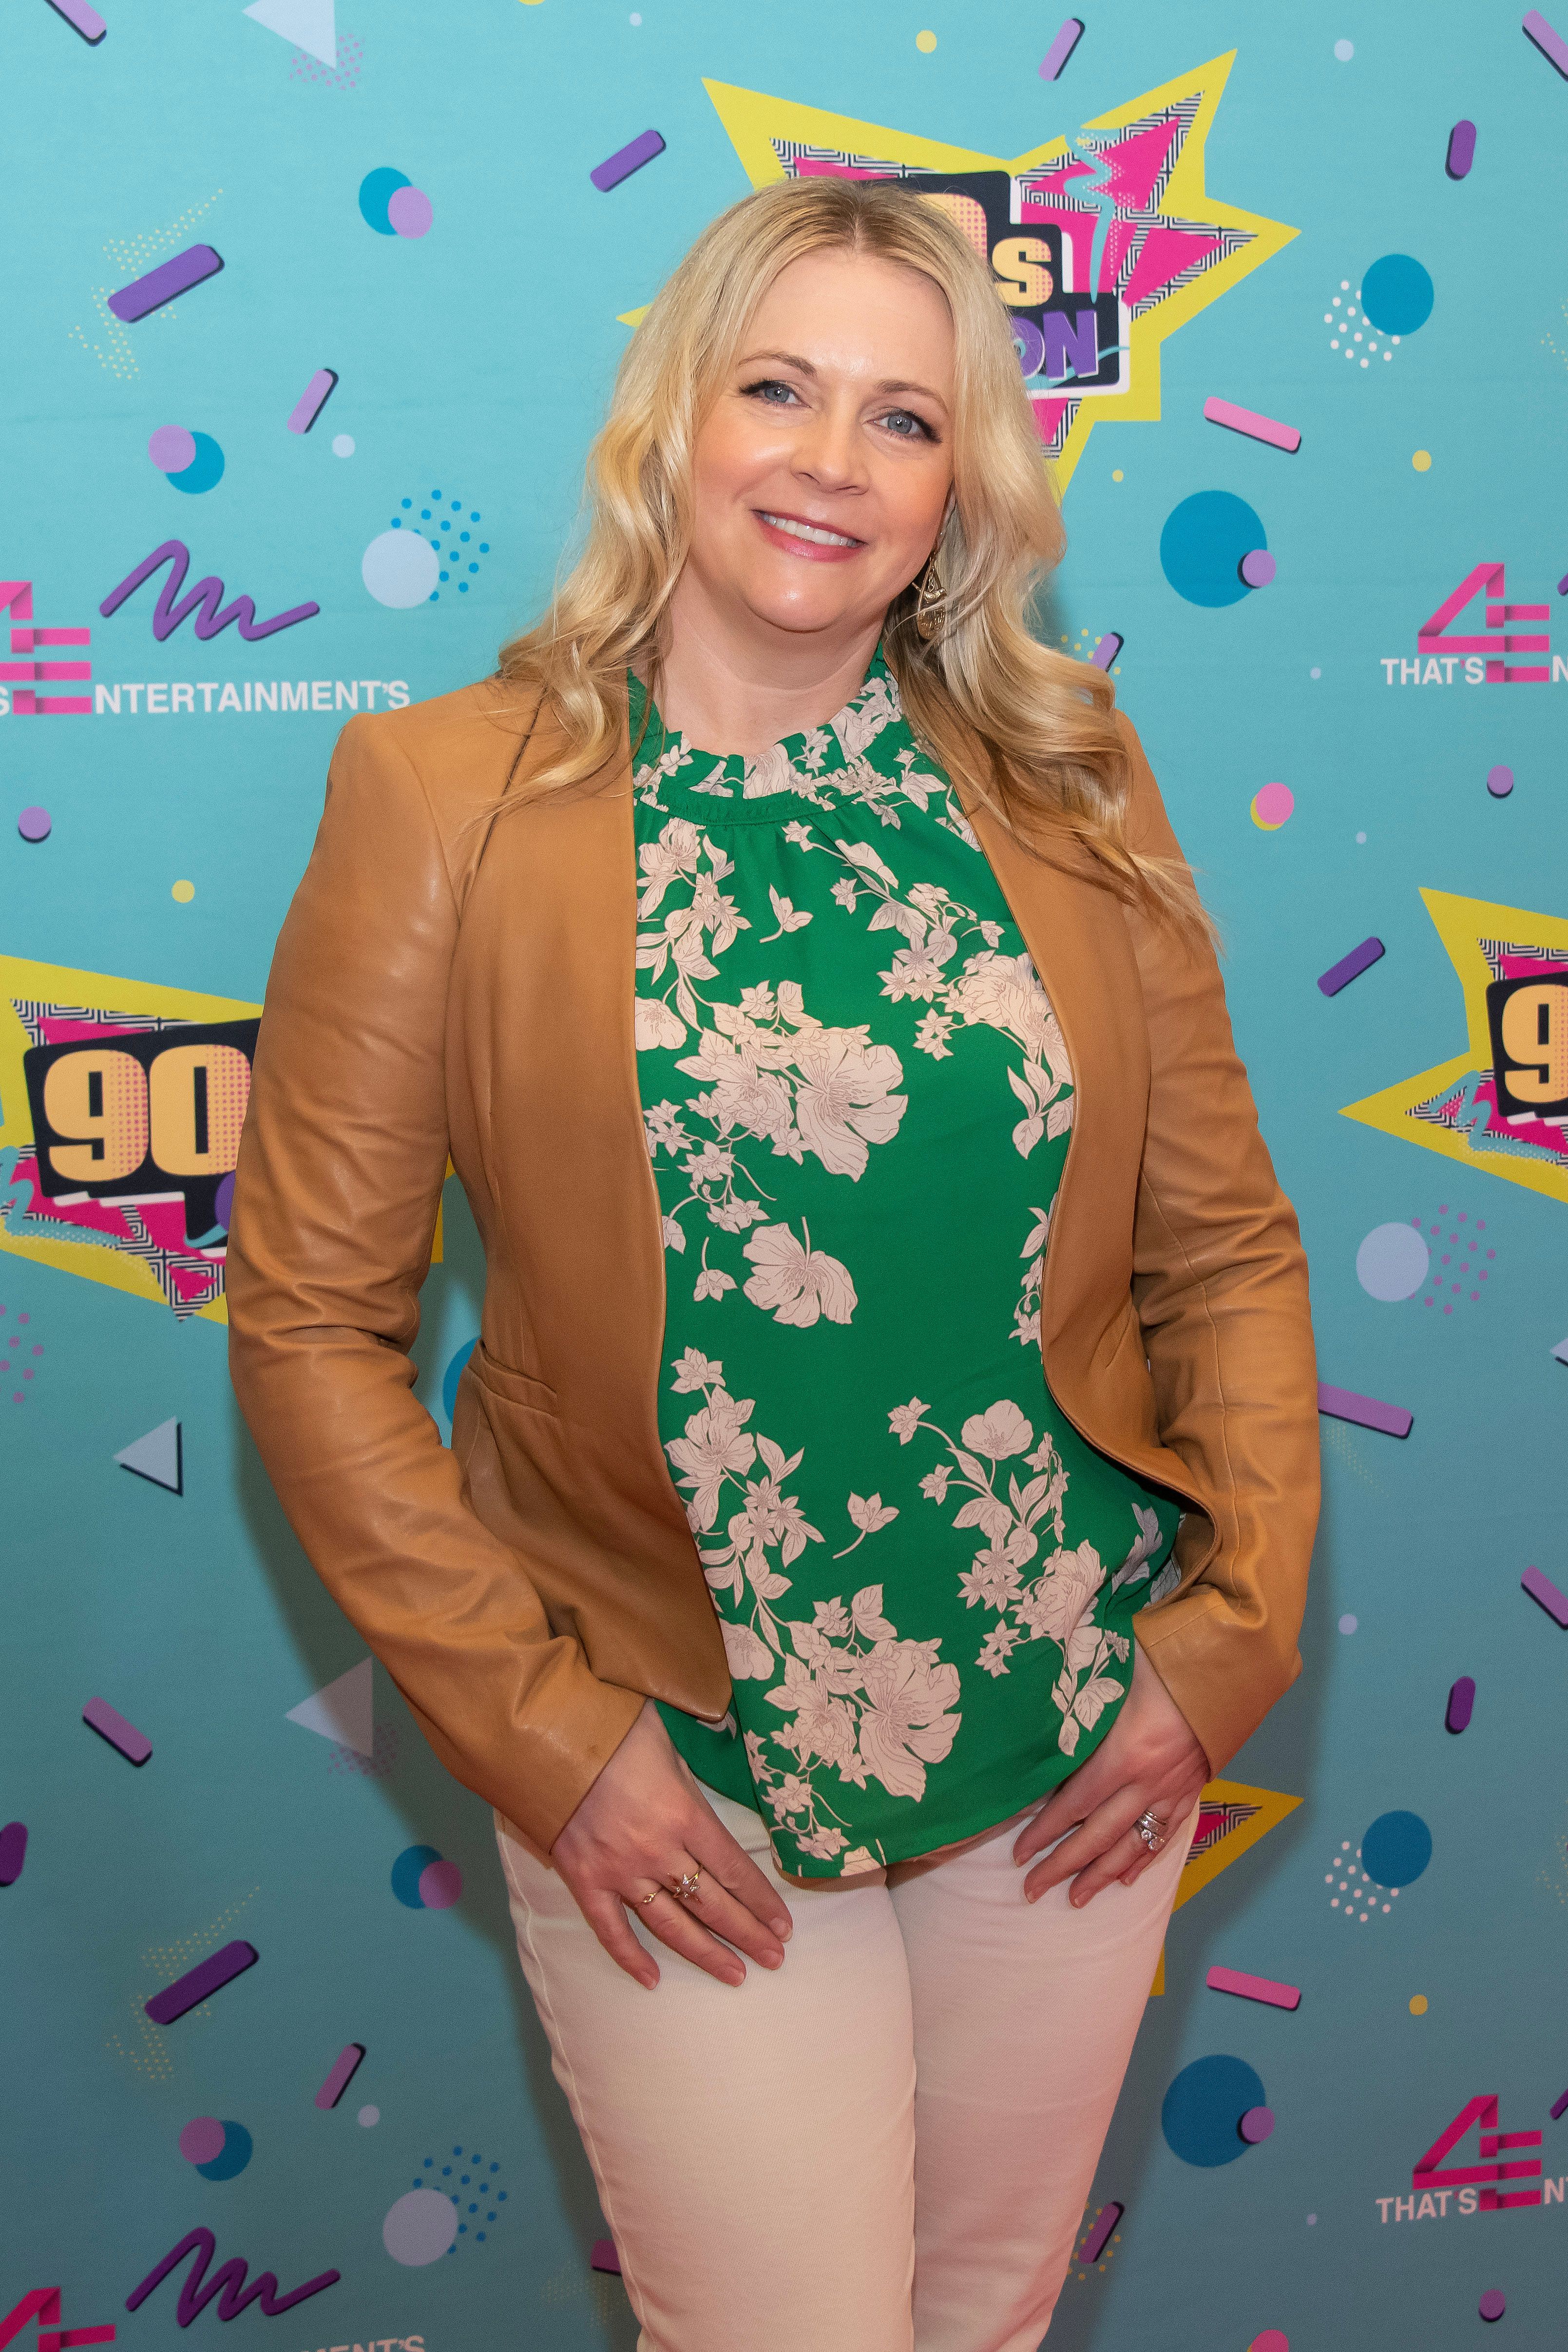 Melissa Joan Hart of the TV series "Sabrina the Teenage Witch" walks the red carpet during 90s Con in Hartford, Connecticut, on March 18, 2023. | Source: Getty Images